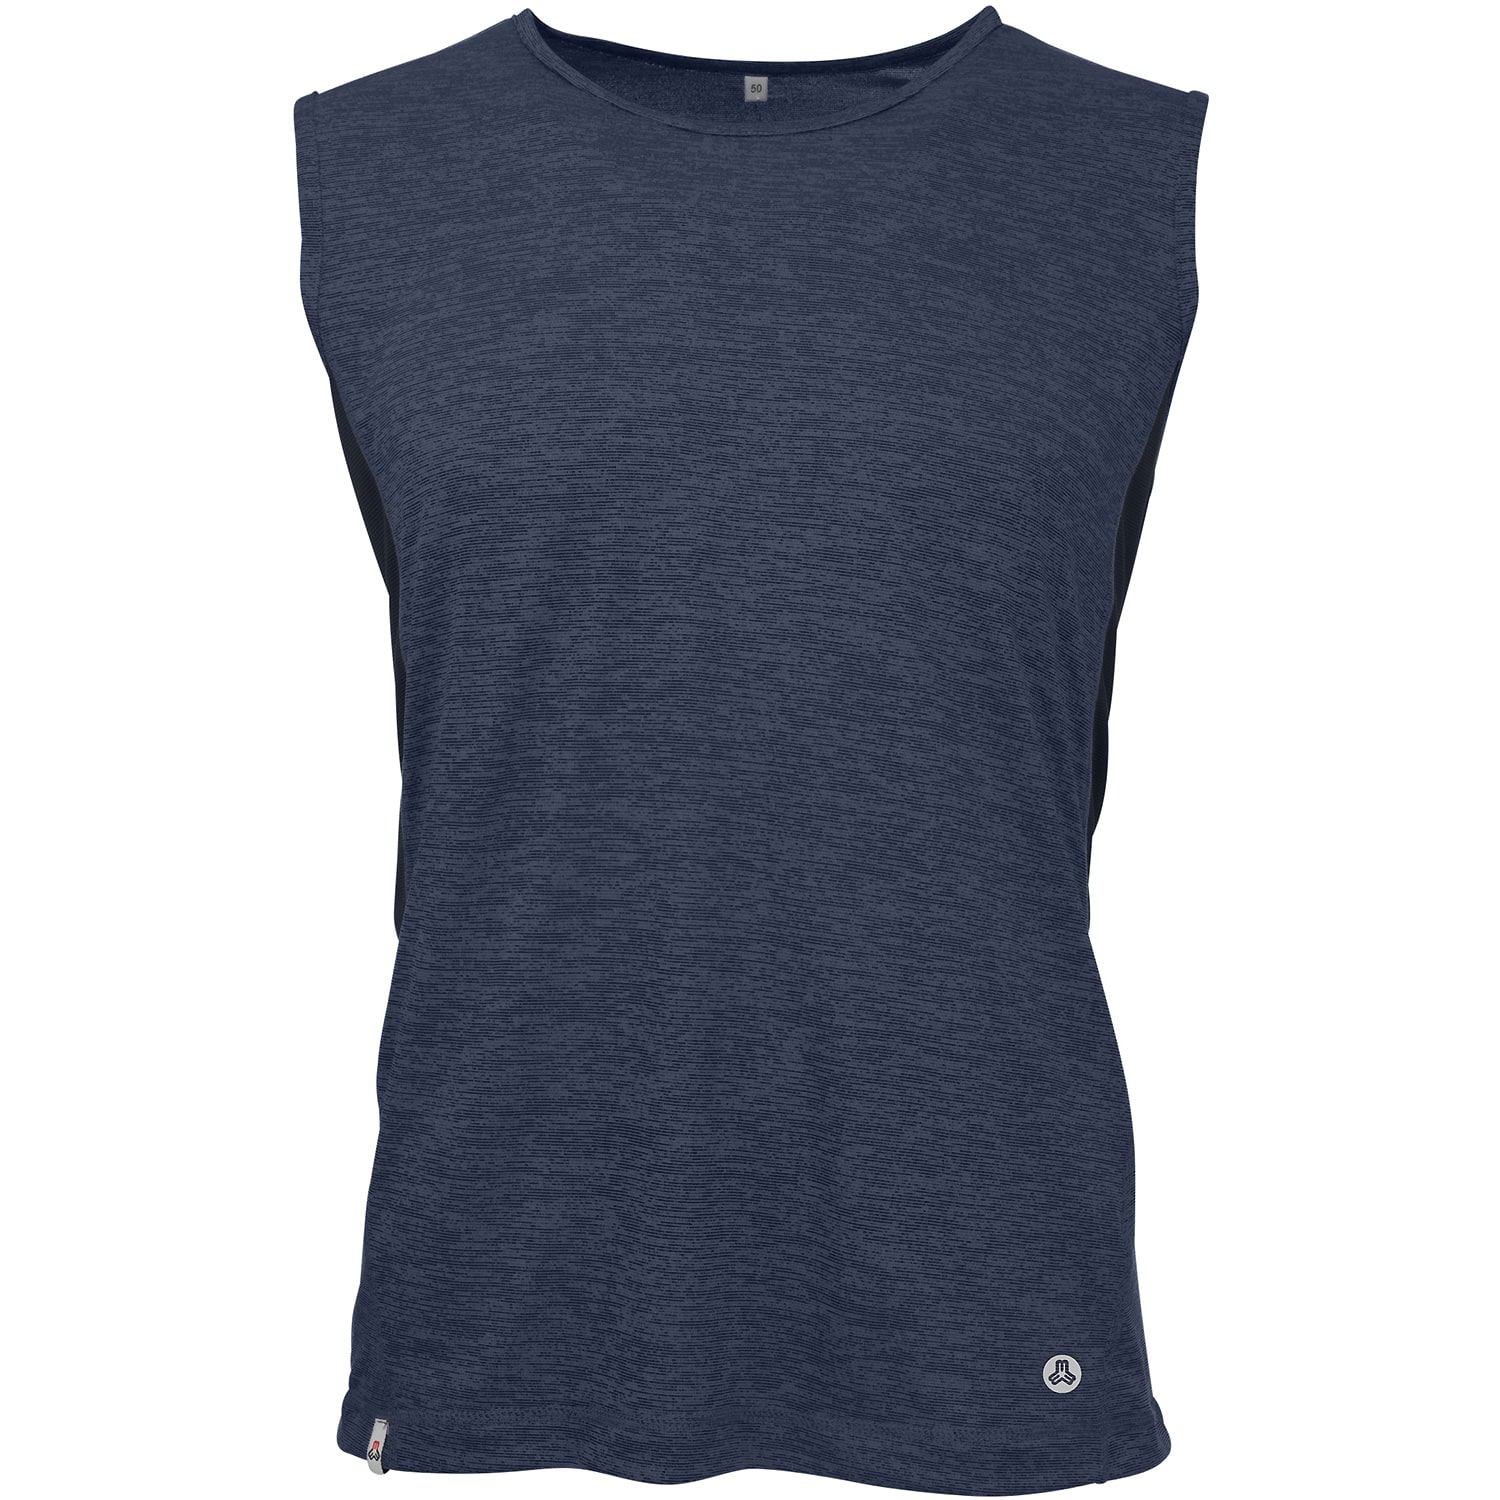 Ammersee fresh - Tank top